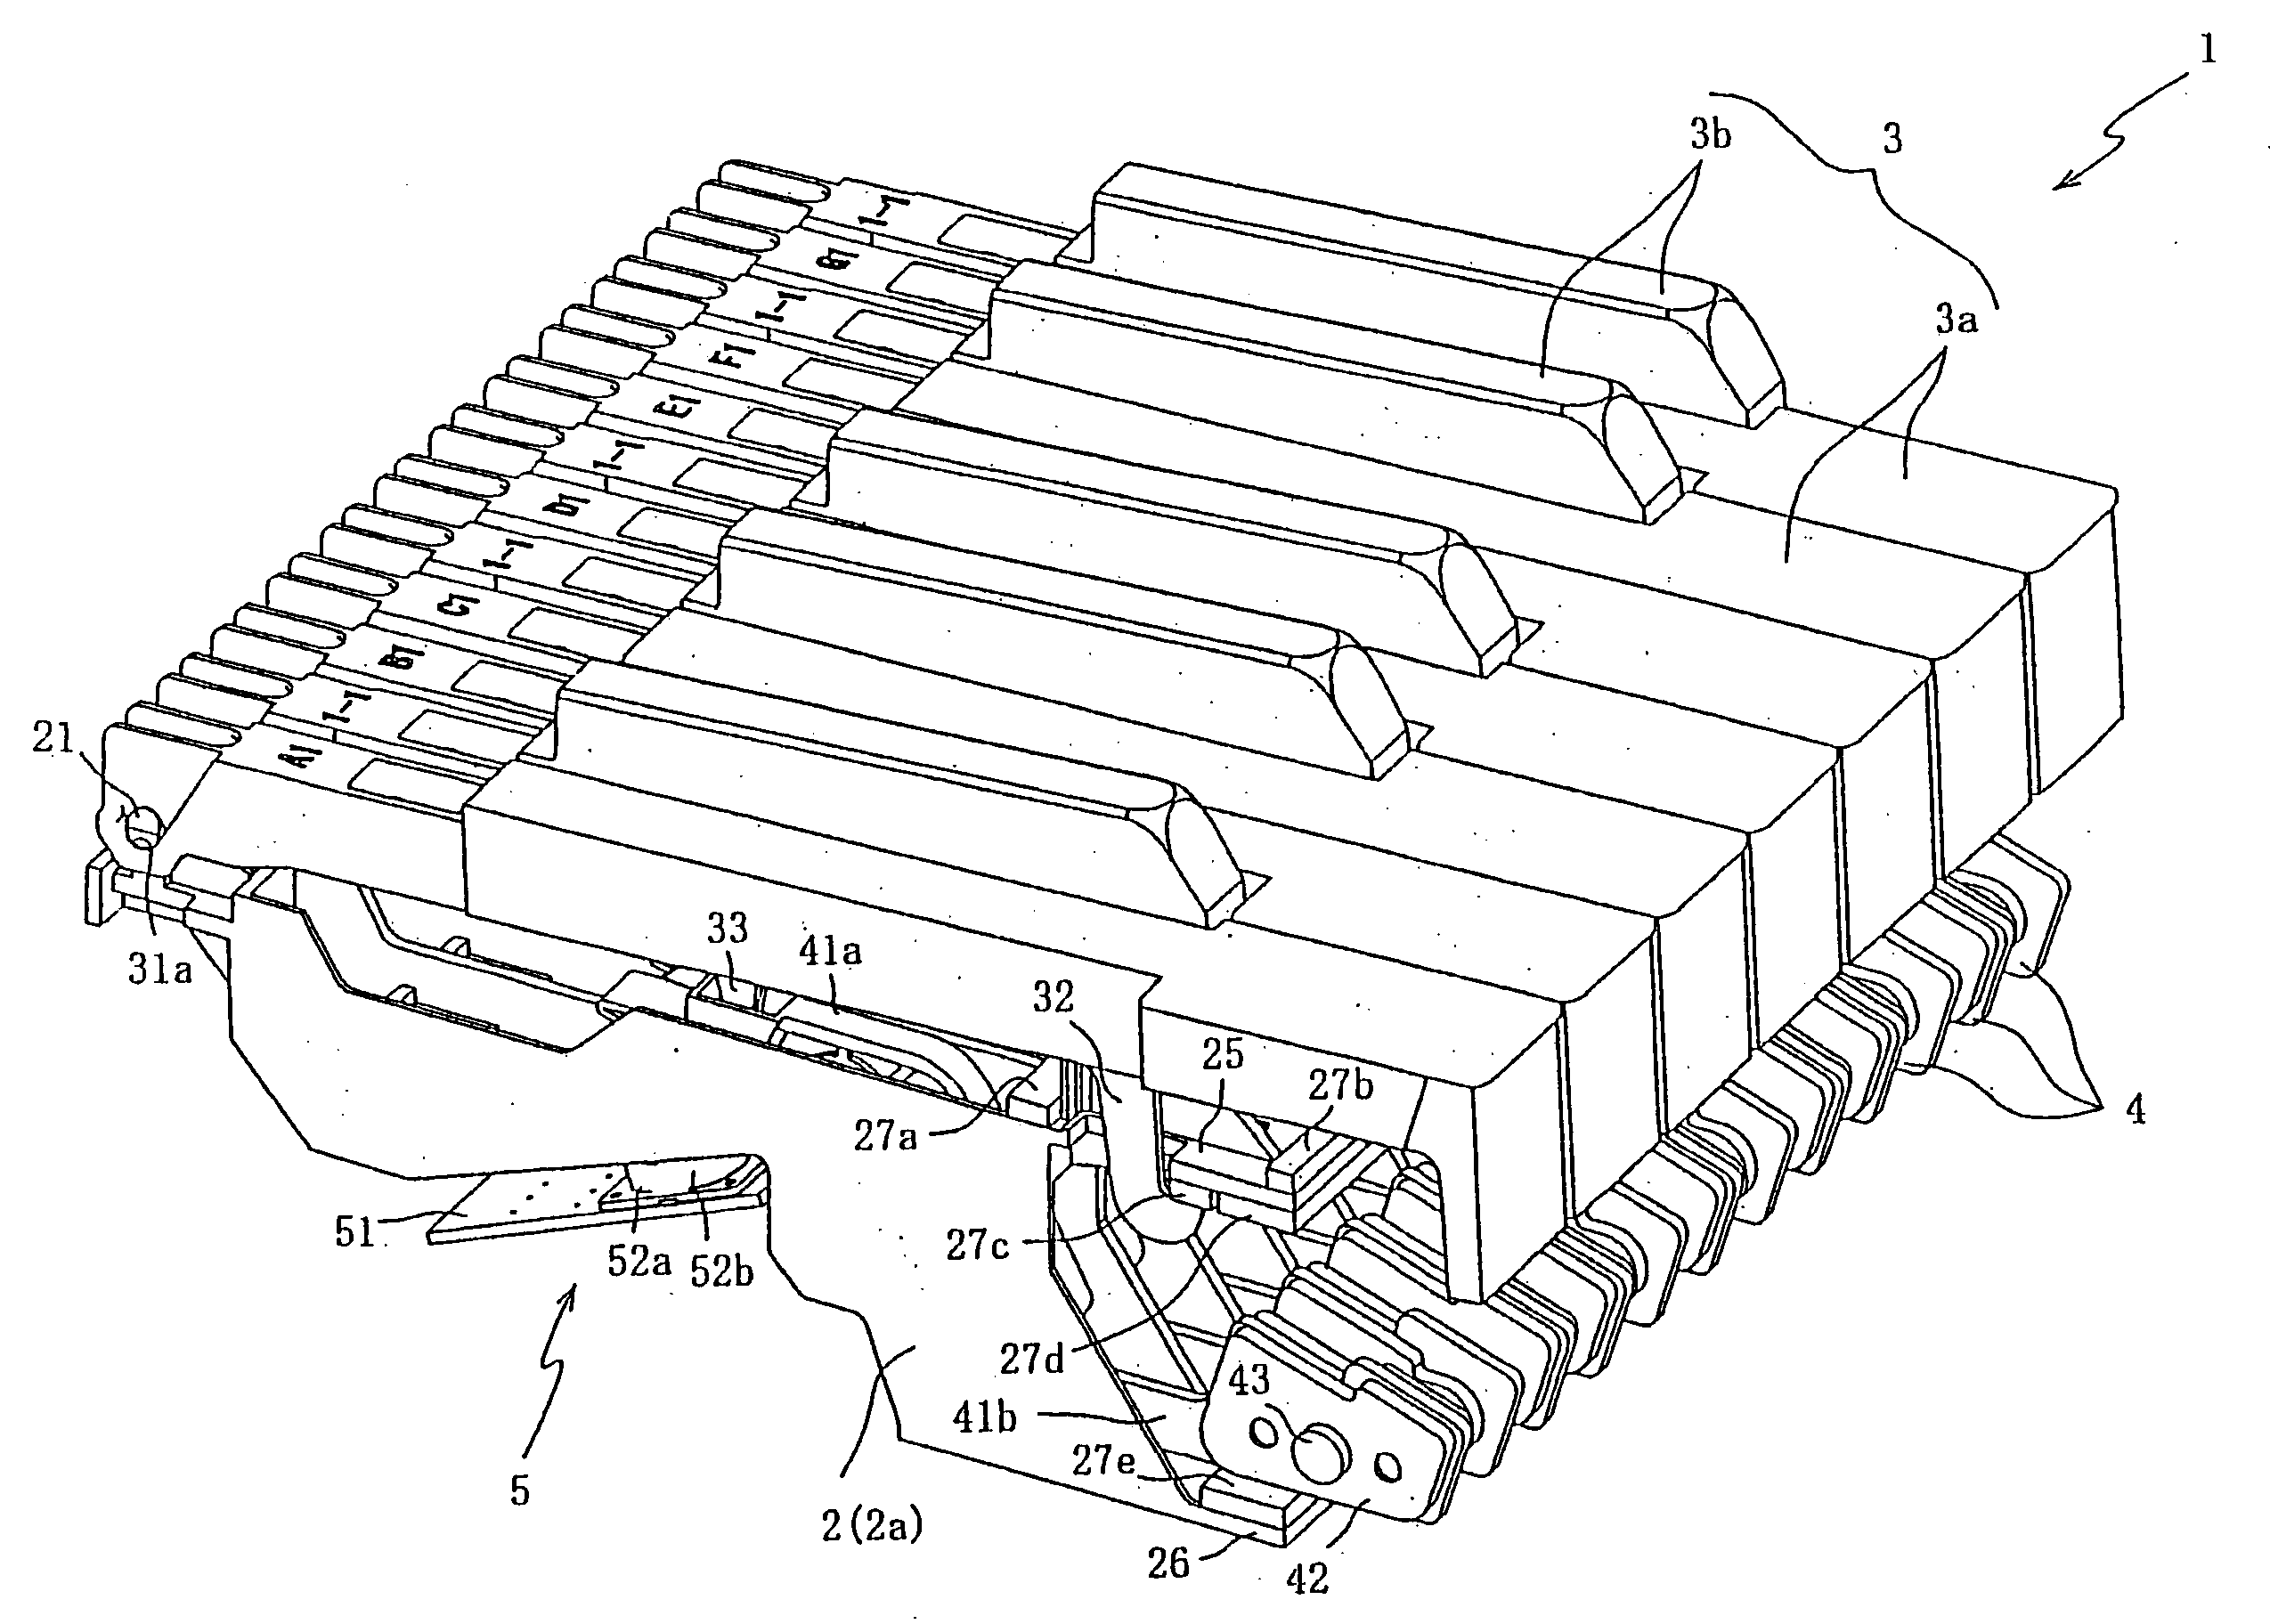 Hammer keyboard system and chassis